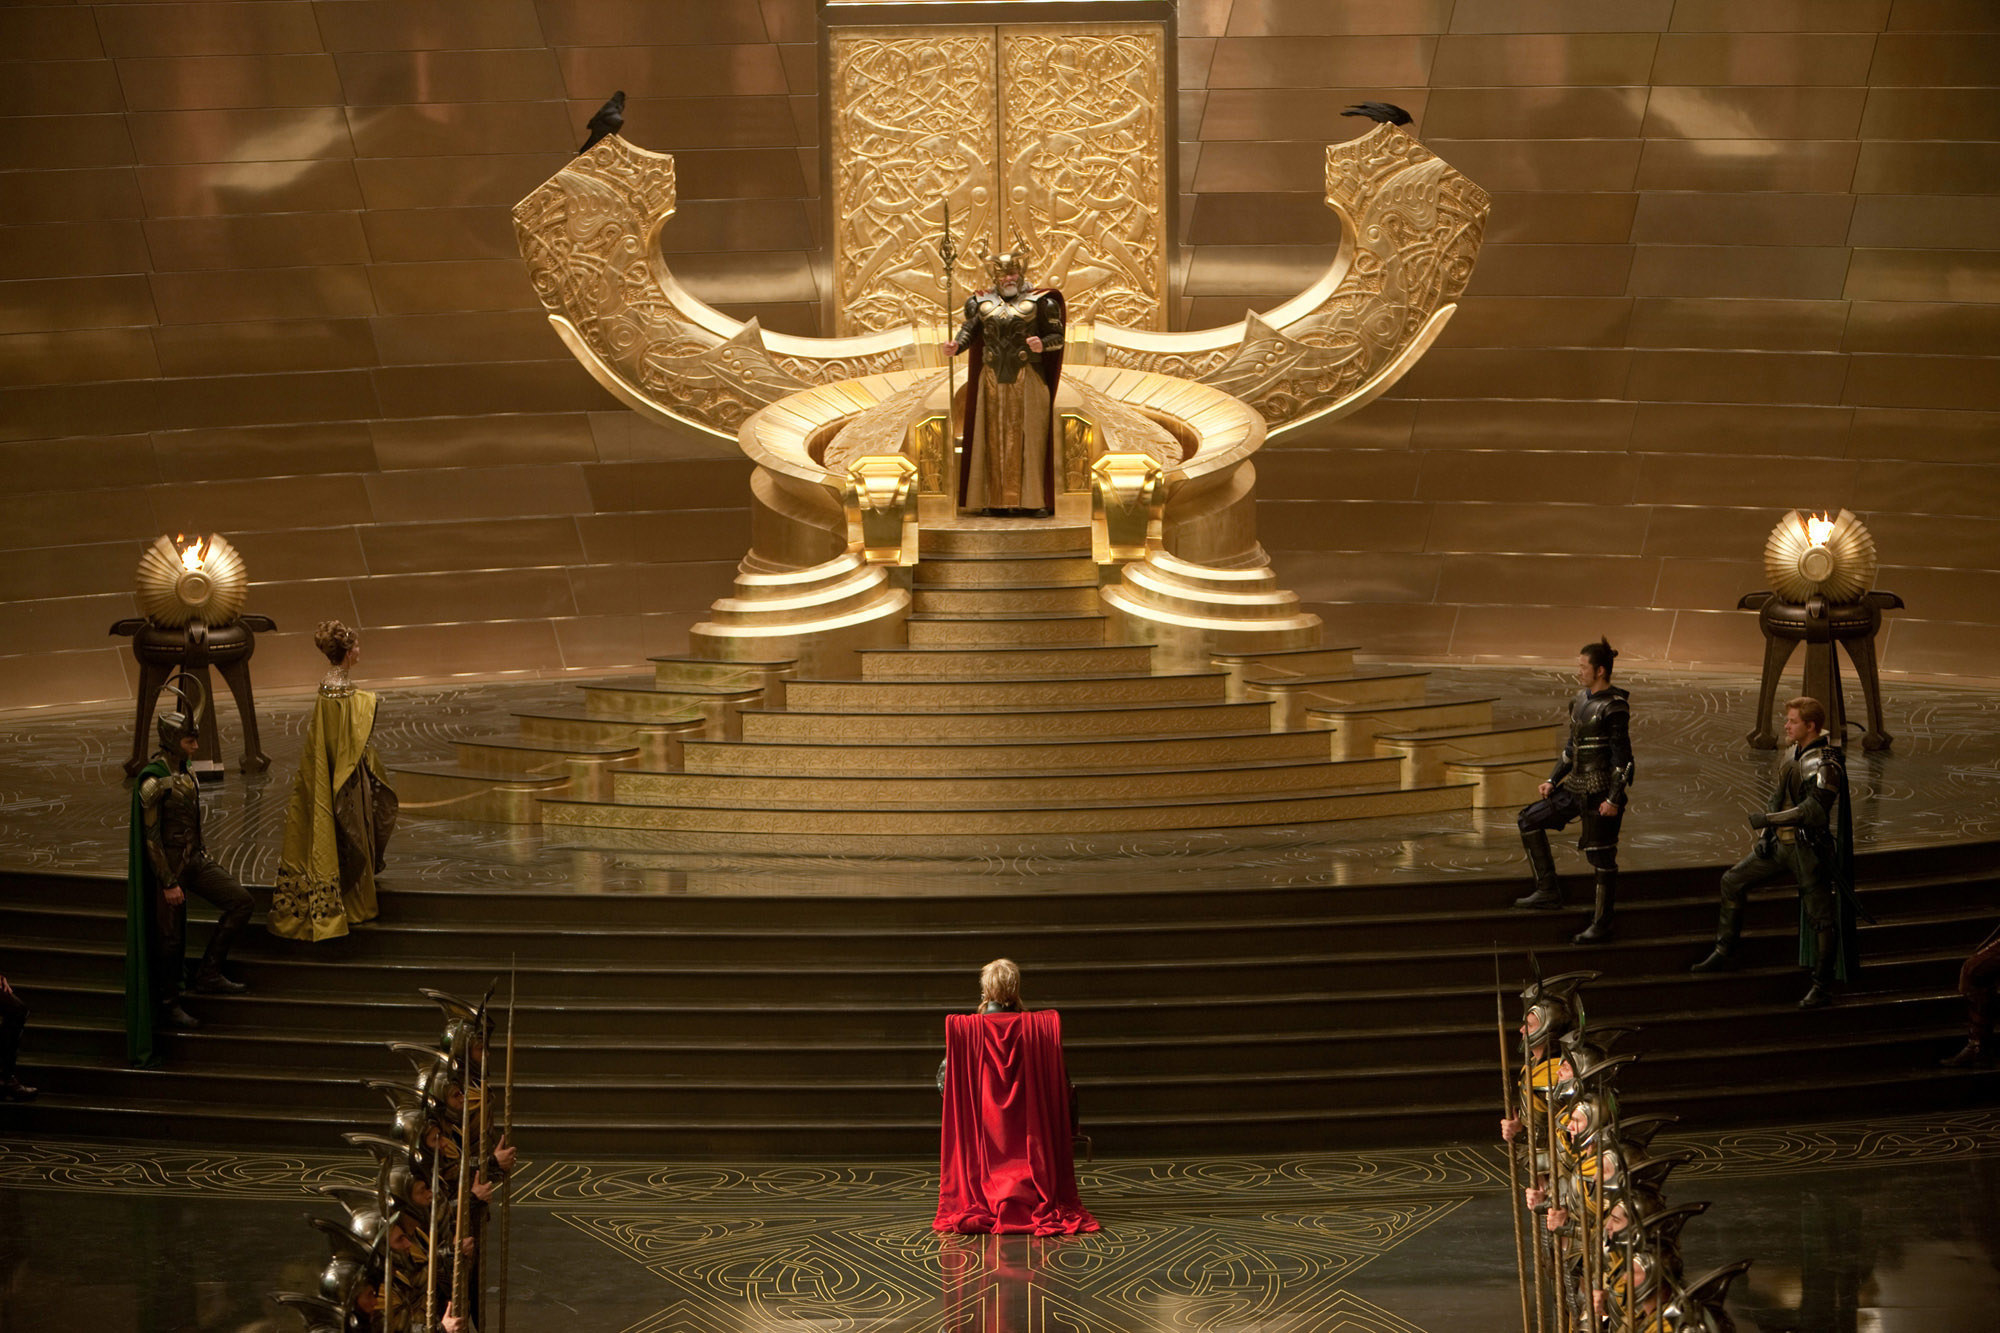 Image from the set of Thor, where Thor kneels before Odin